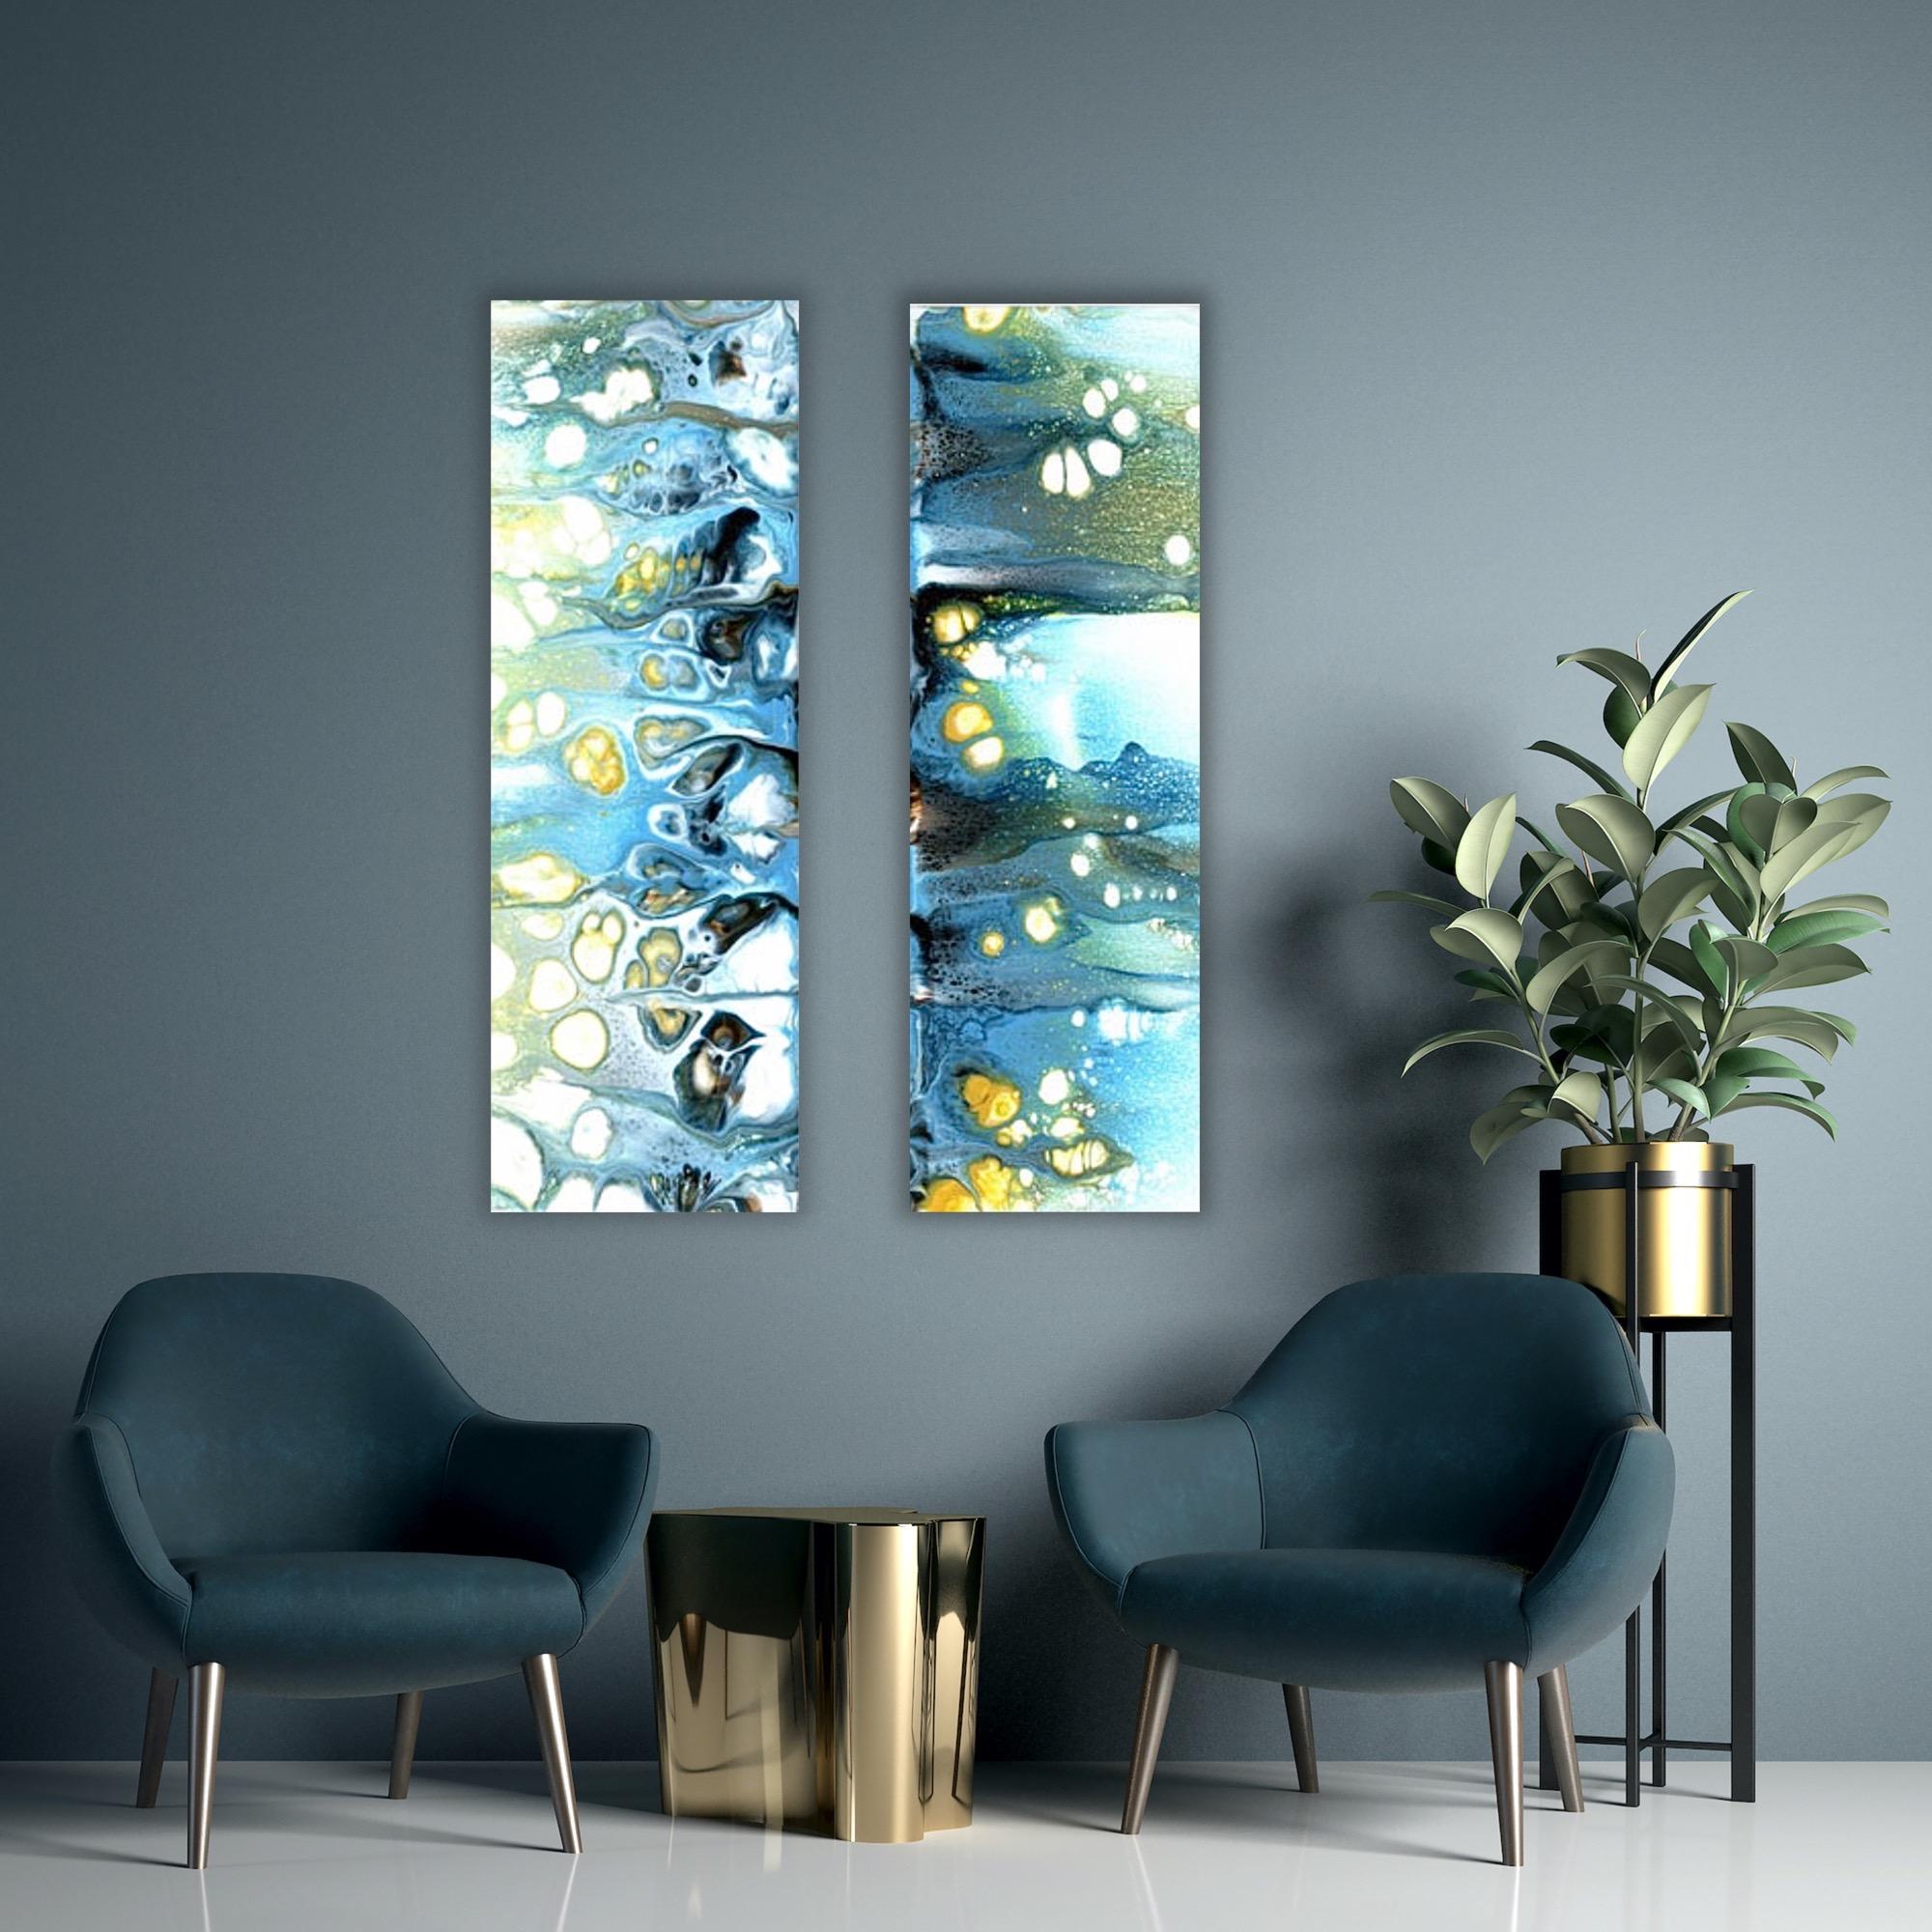 Modern Abstract Painting Diptych, Celeste Reiter, Signed Limited Edition Giclee’ For Sale 5